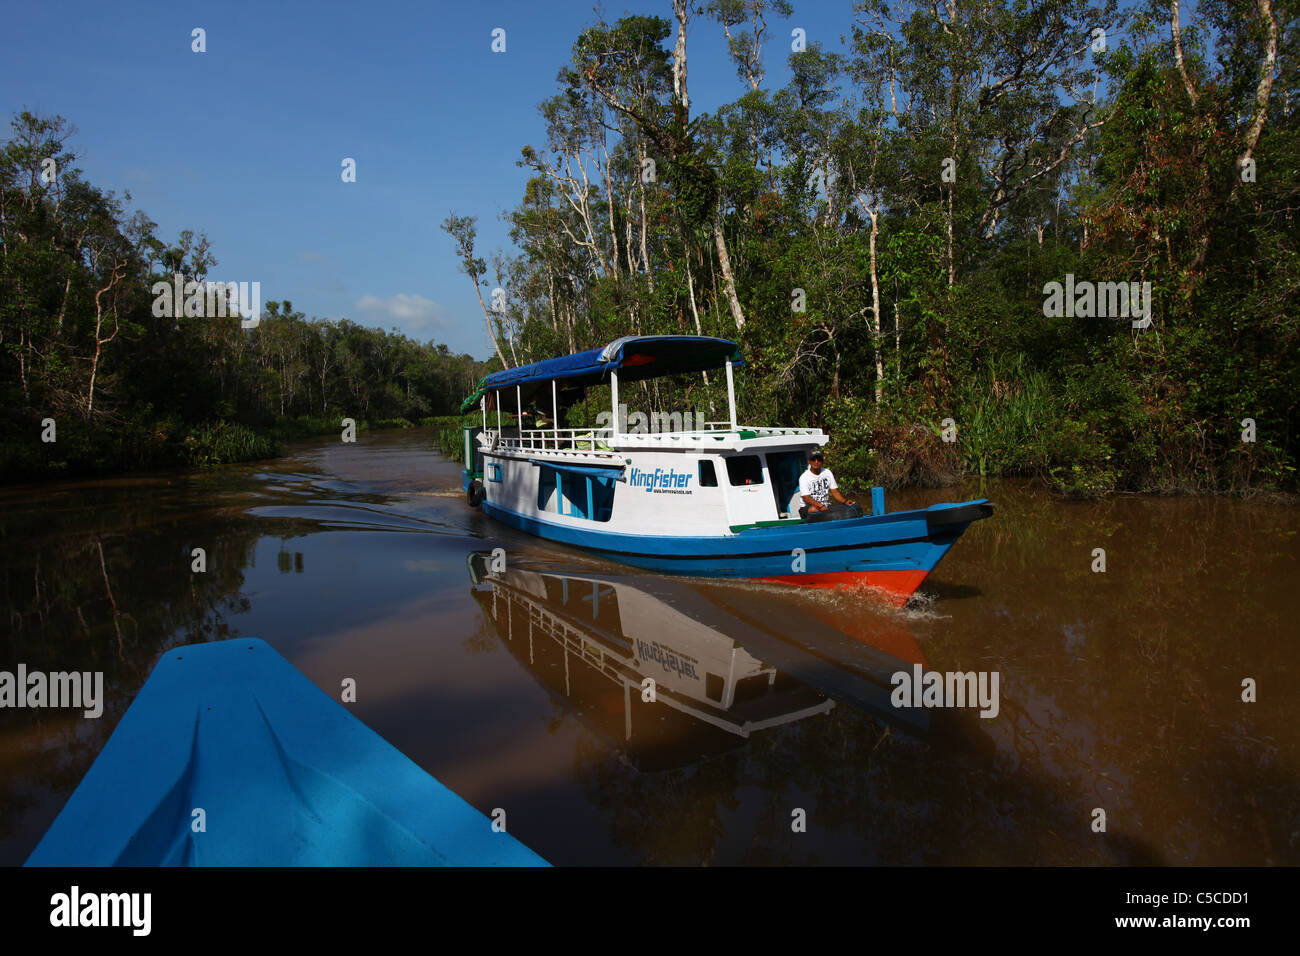 A wooden boat cruises the Sekonyer River, Tanjung Puting National Park, Central Kalimantan, Indonesia Stock Photo